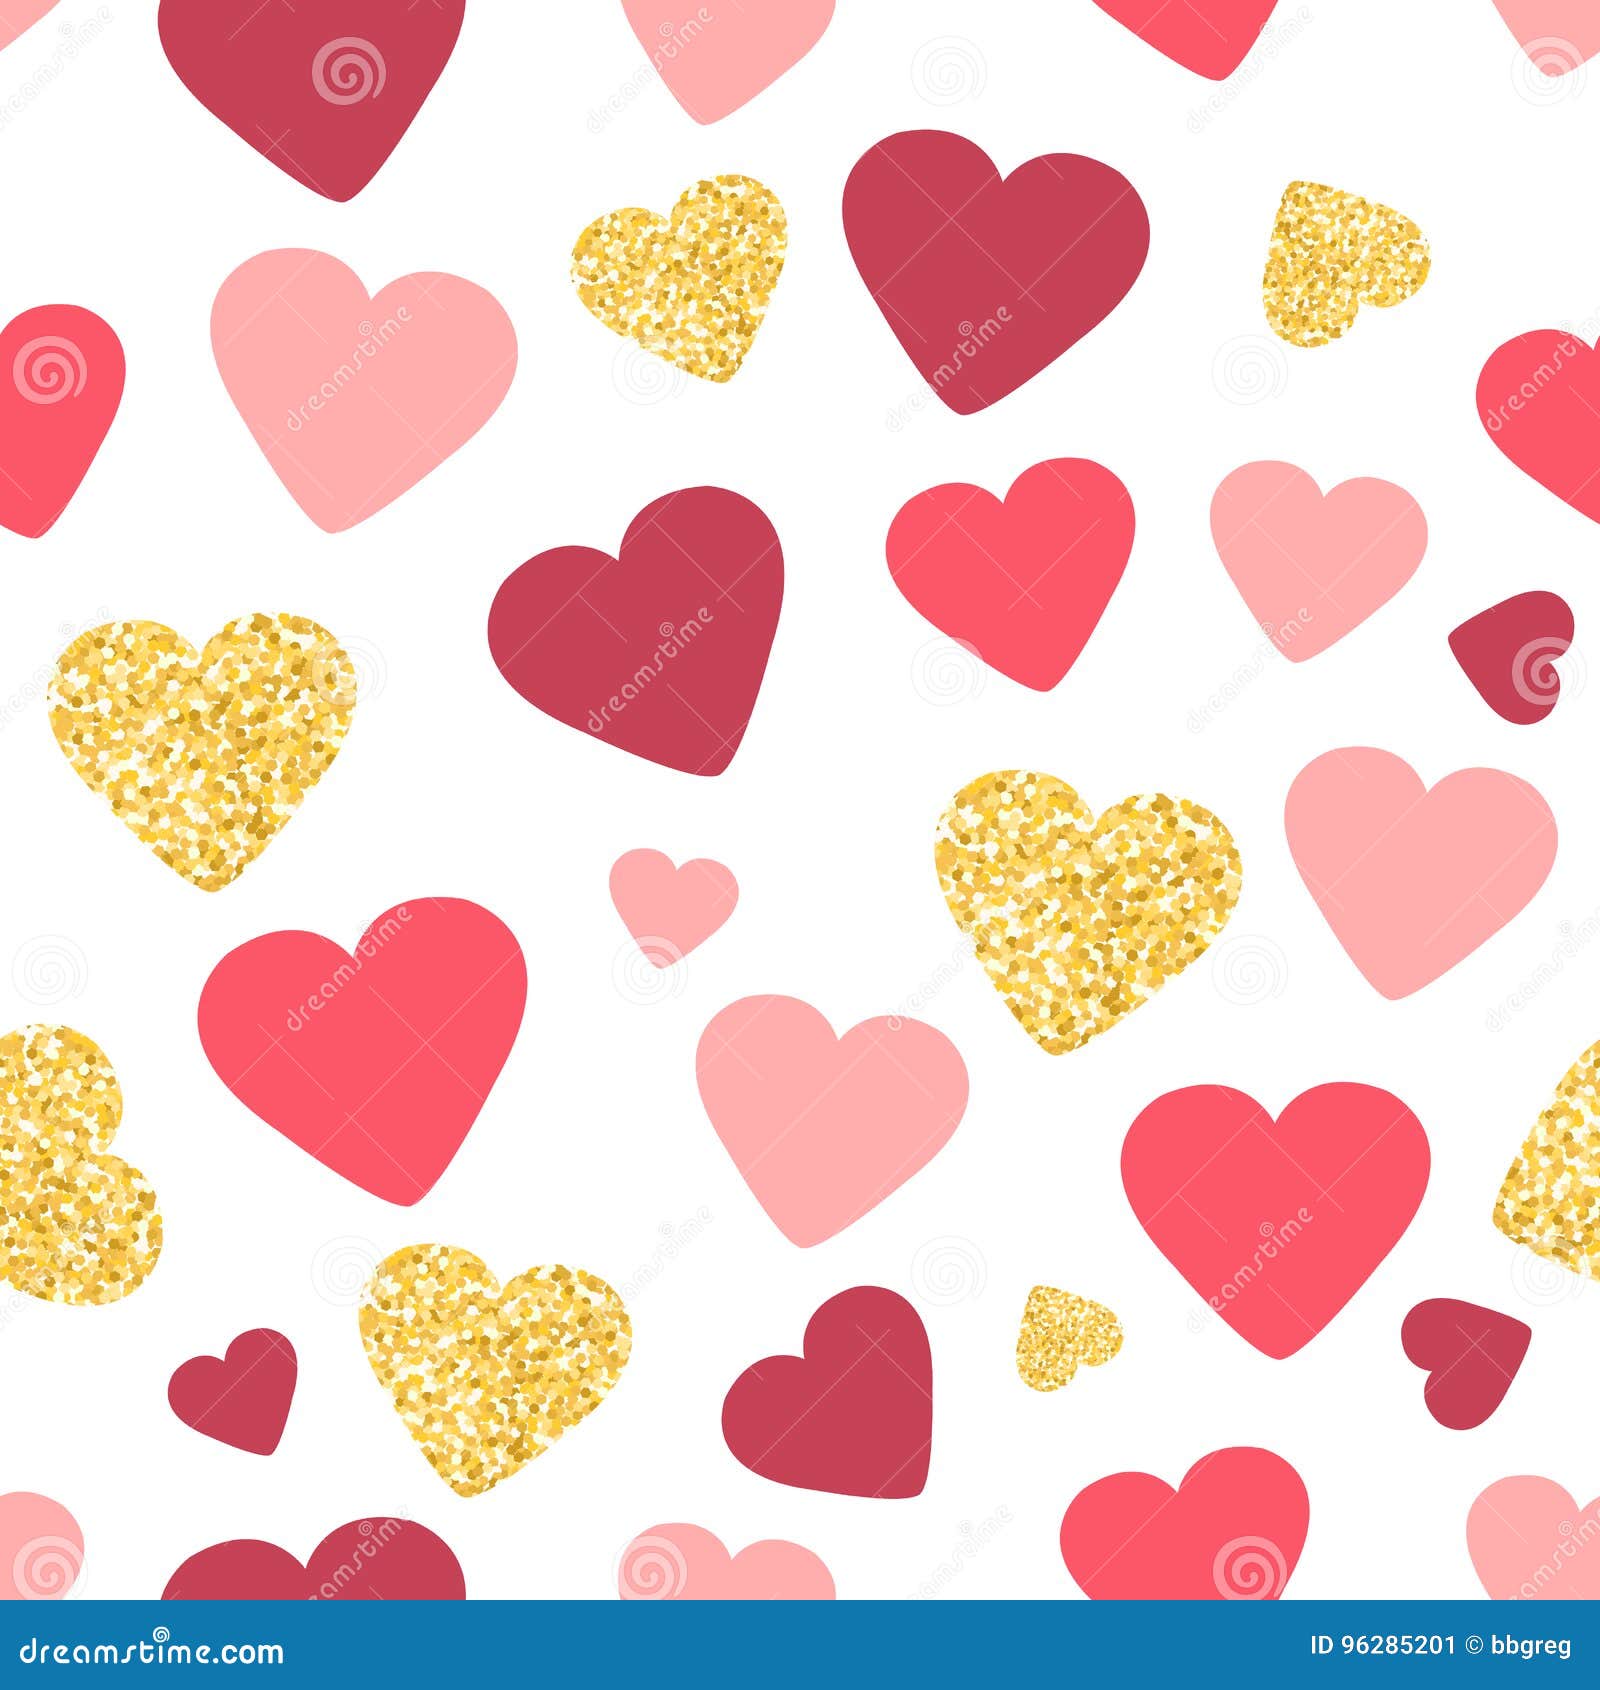 Wallpaper By Artist Unknown  Iphone wallpaper glitter Heart iphone  wallpaper Love pink wallpaper